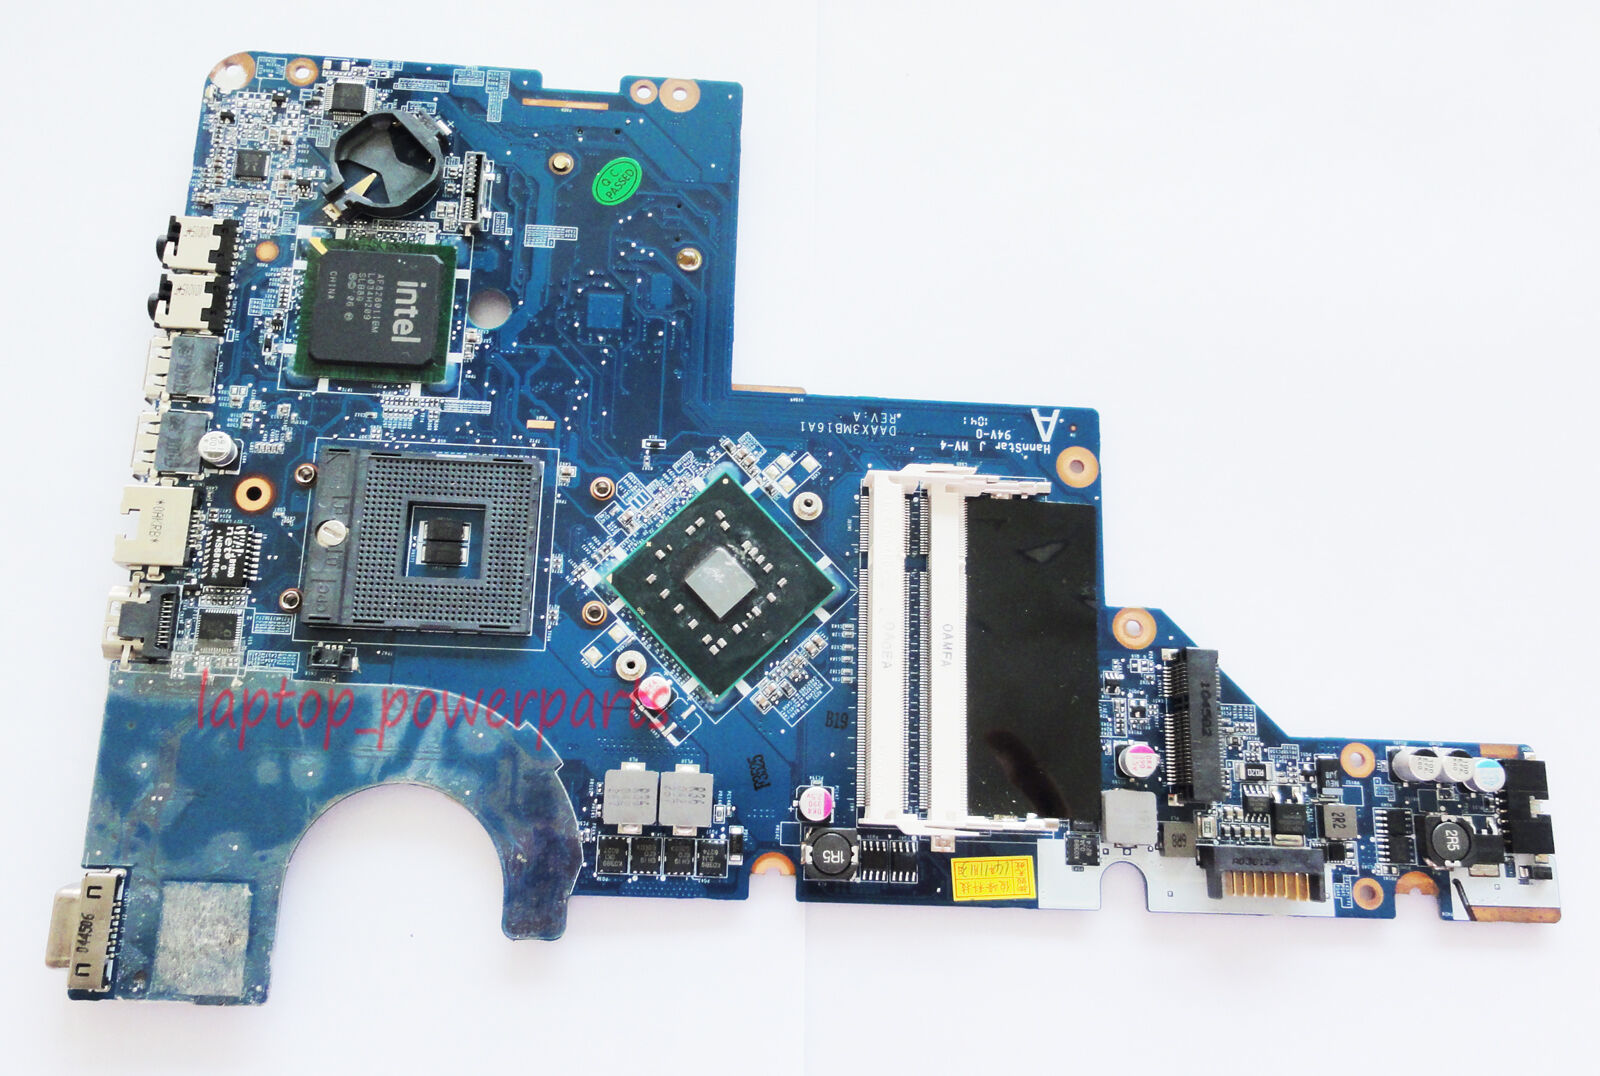 HP G62 G72 G62-220US G62-225NR G72-227WM G72-259WM Intel Motherboard 616449-001 Up for sale is a used HP G62